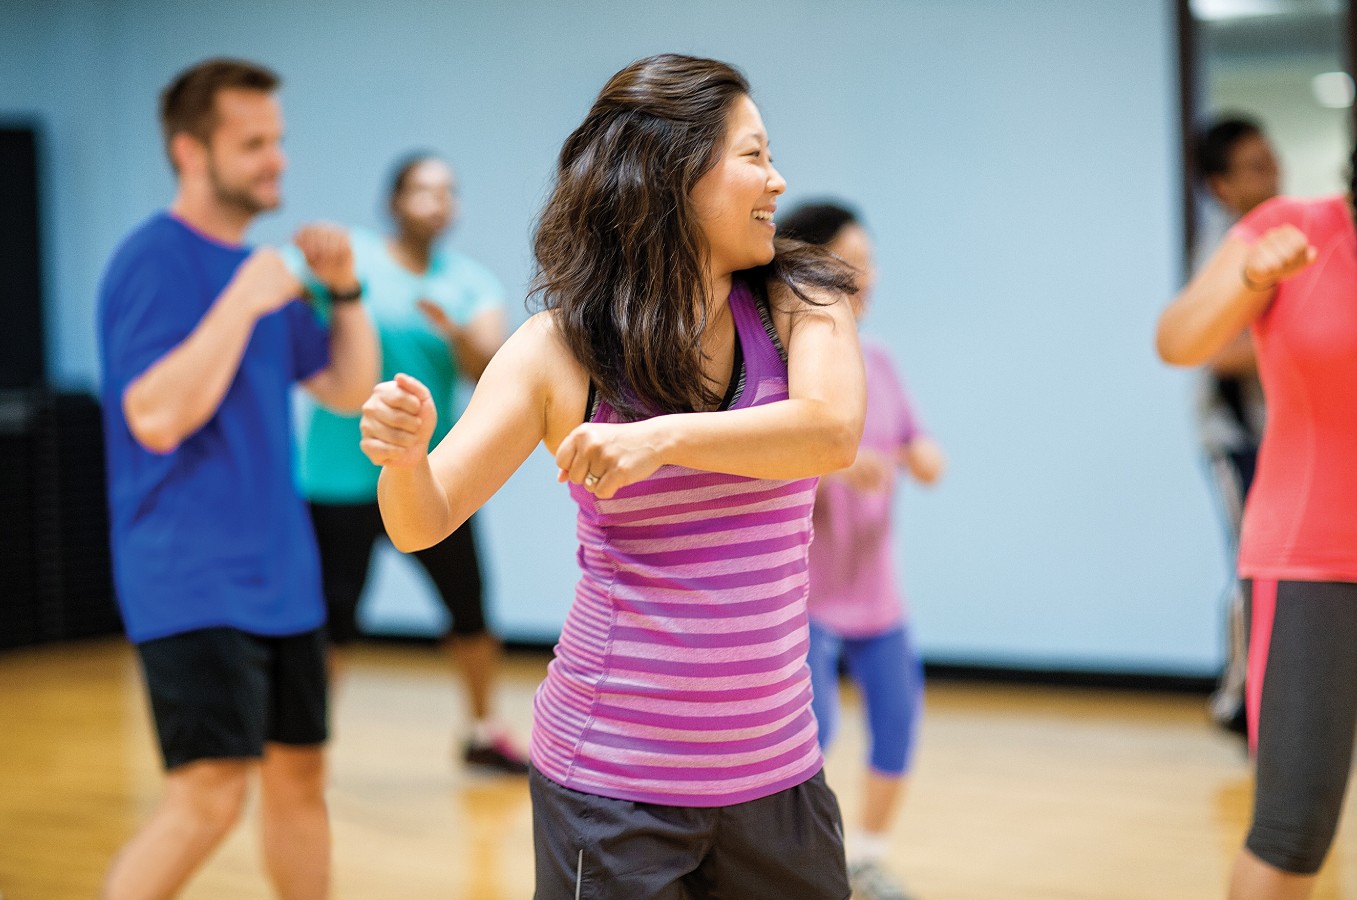 Group fitness will keep you healthy, connected and having fun. We offer 110 group exercise and water exercise classes each week ranging from Power Muscle, Yoga, Pilates, Kickboxing, Zumba,  Boot Camp, Water Aerobics, Cycling and more.